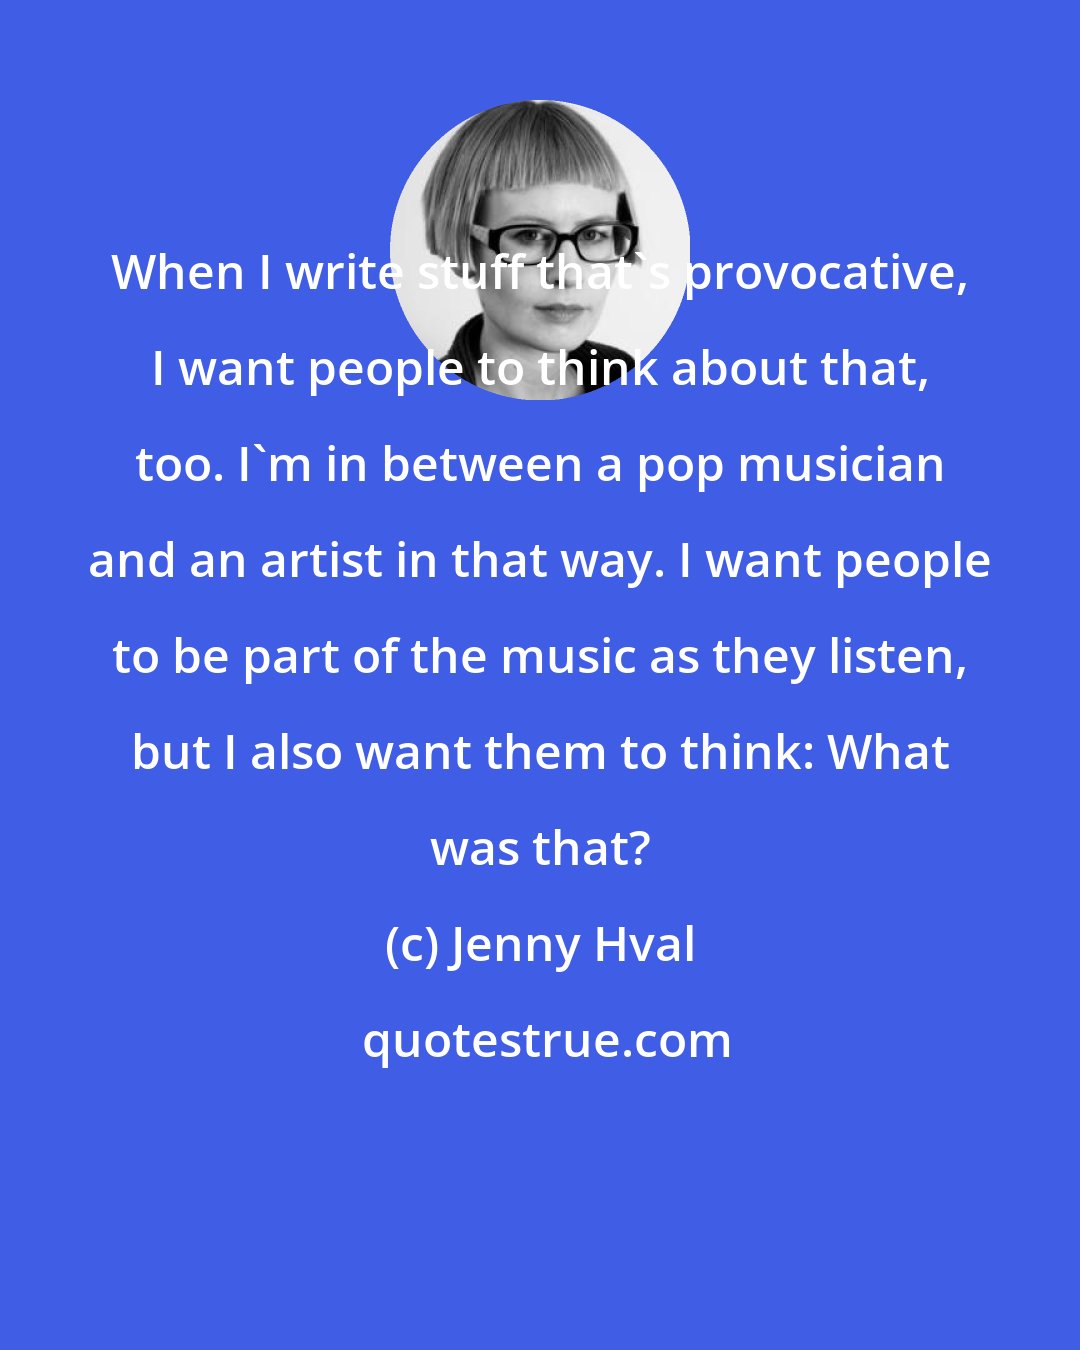 Jenny Hval: When I write stuff that's provocative, I want people to think about that, too. I'm in between a pop musician and an artist in that way. I want people to be part of the music as they listen, but I also want them to think: What was that?